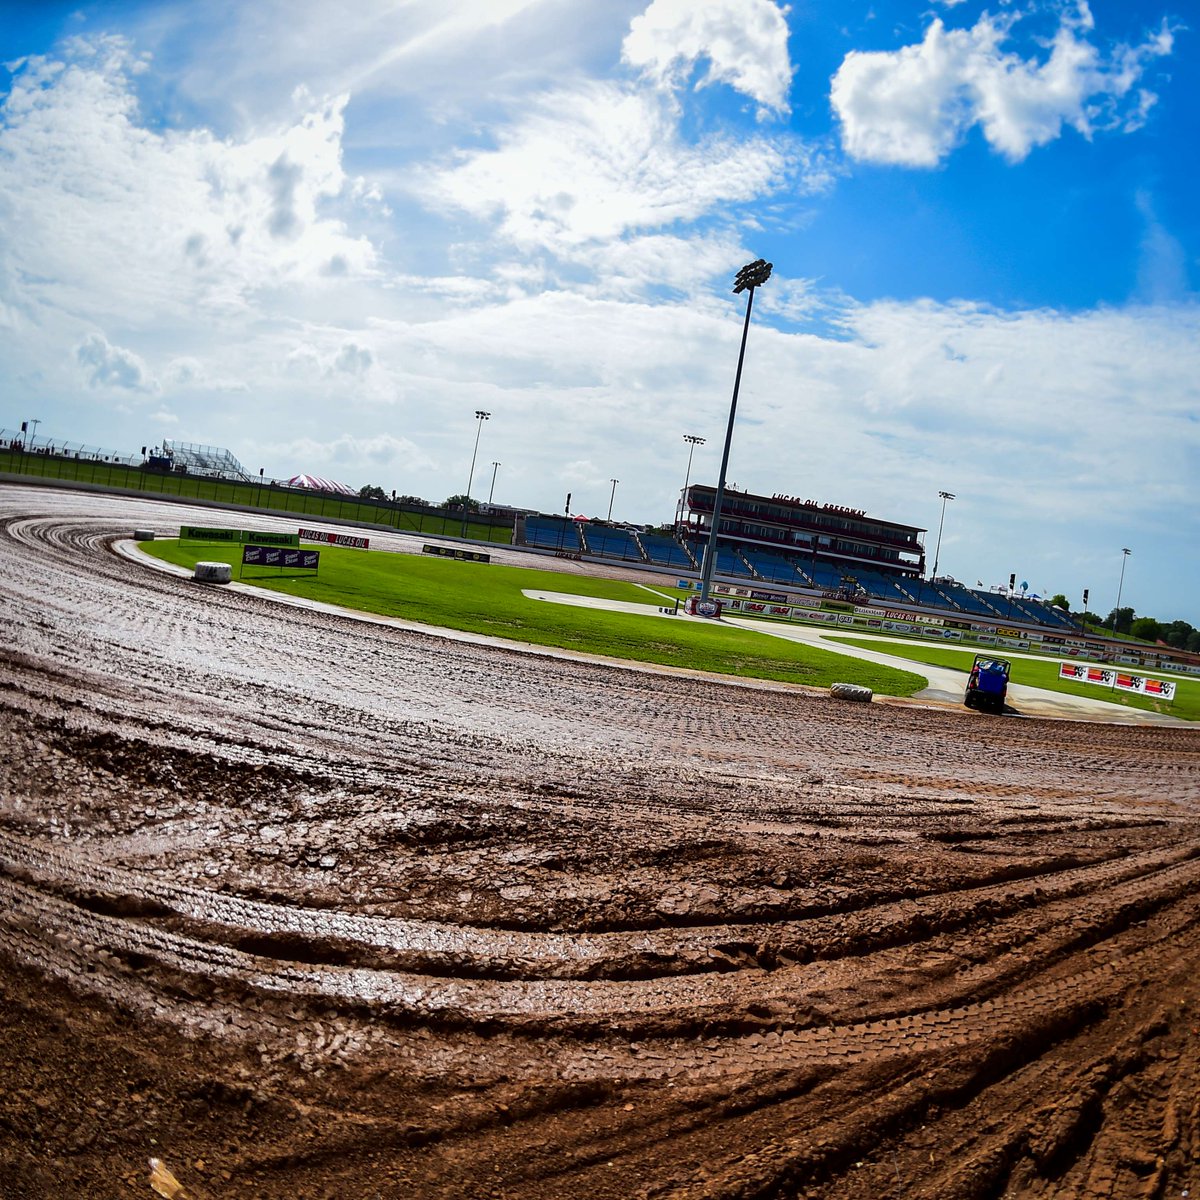 🏁 Who's visiting 'The Diamond of Race Tracks', AKA @lucasspeedway this summer for some dirt track racing?!

🤩 We have some exciting races happening over the next couple of weeks! We'll see you there!

#LucasWorks #LucasSpeedway #Dirt #DirtRacing #FlashbackFriday #Friday #Racing